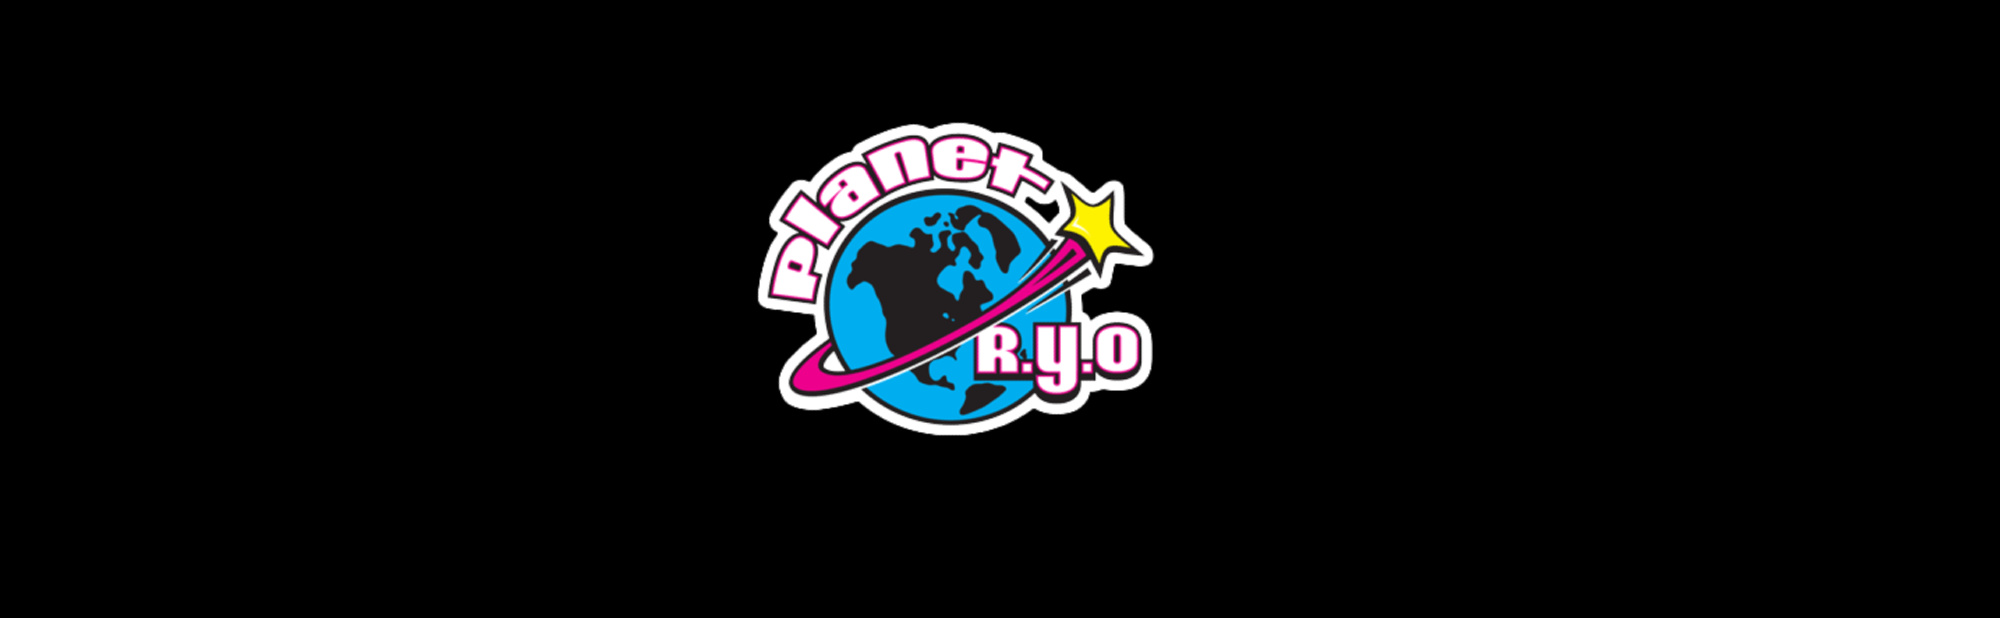 image of planet ryo in york pa